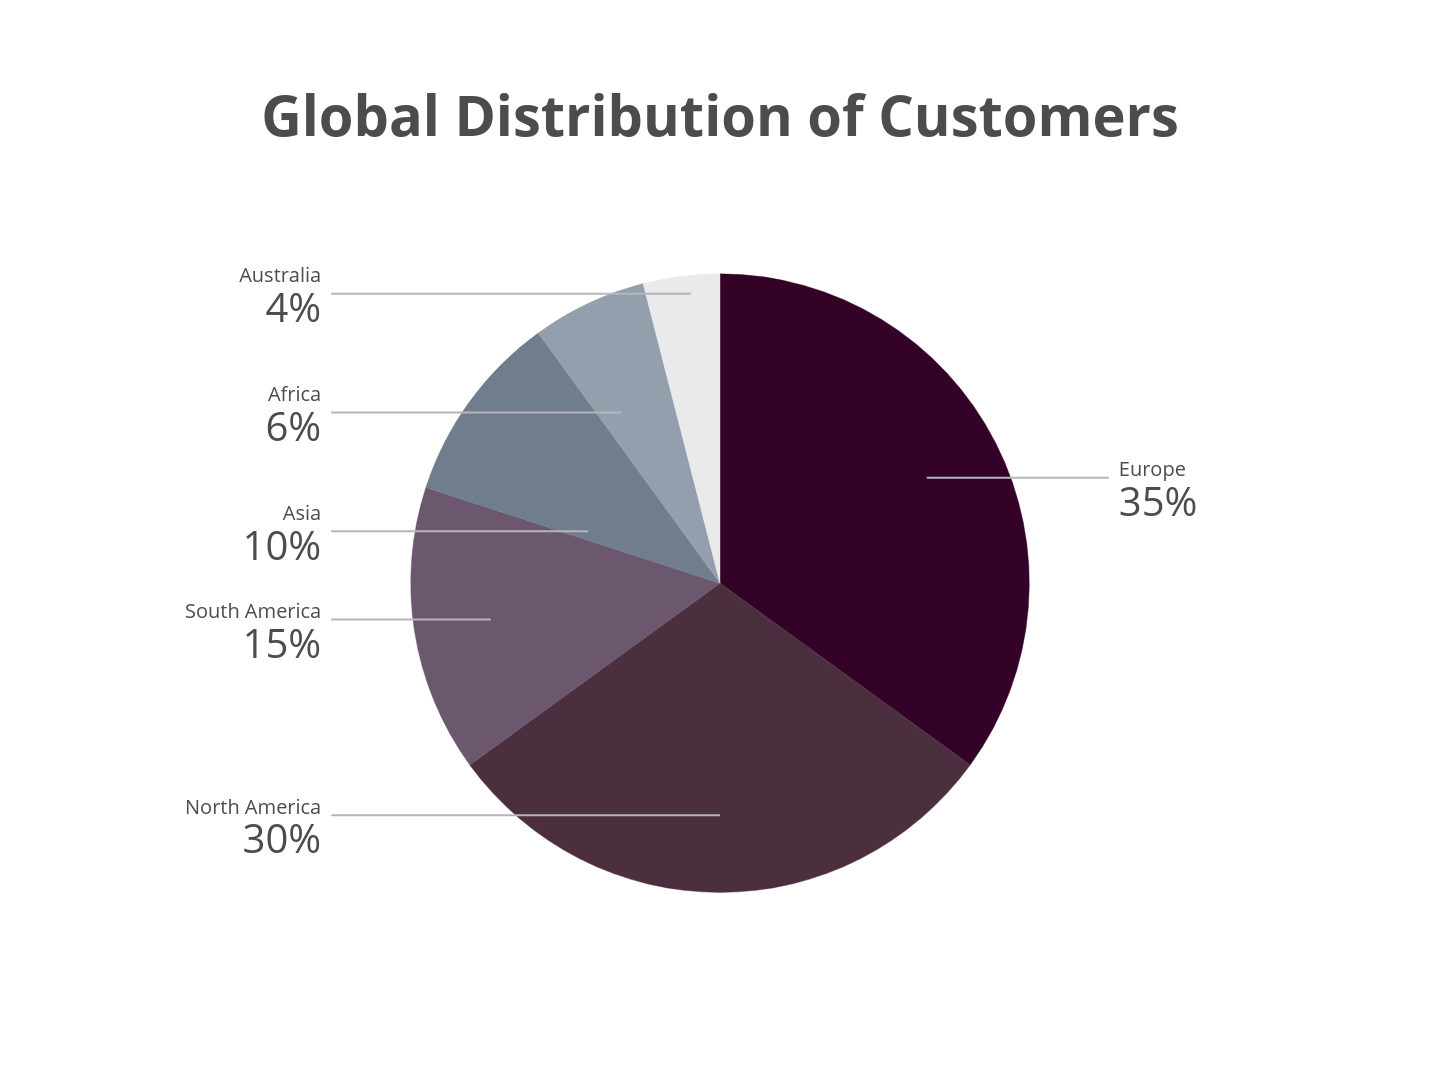 pie chart showing global distribution of customers